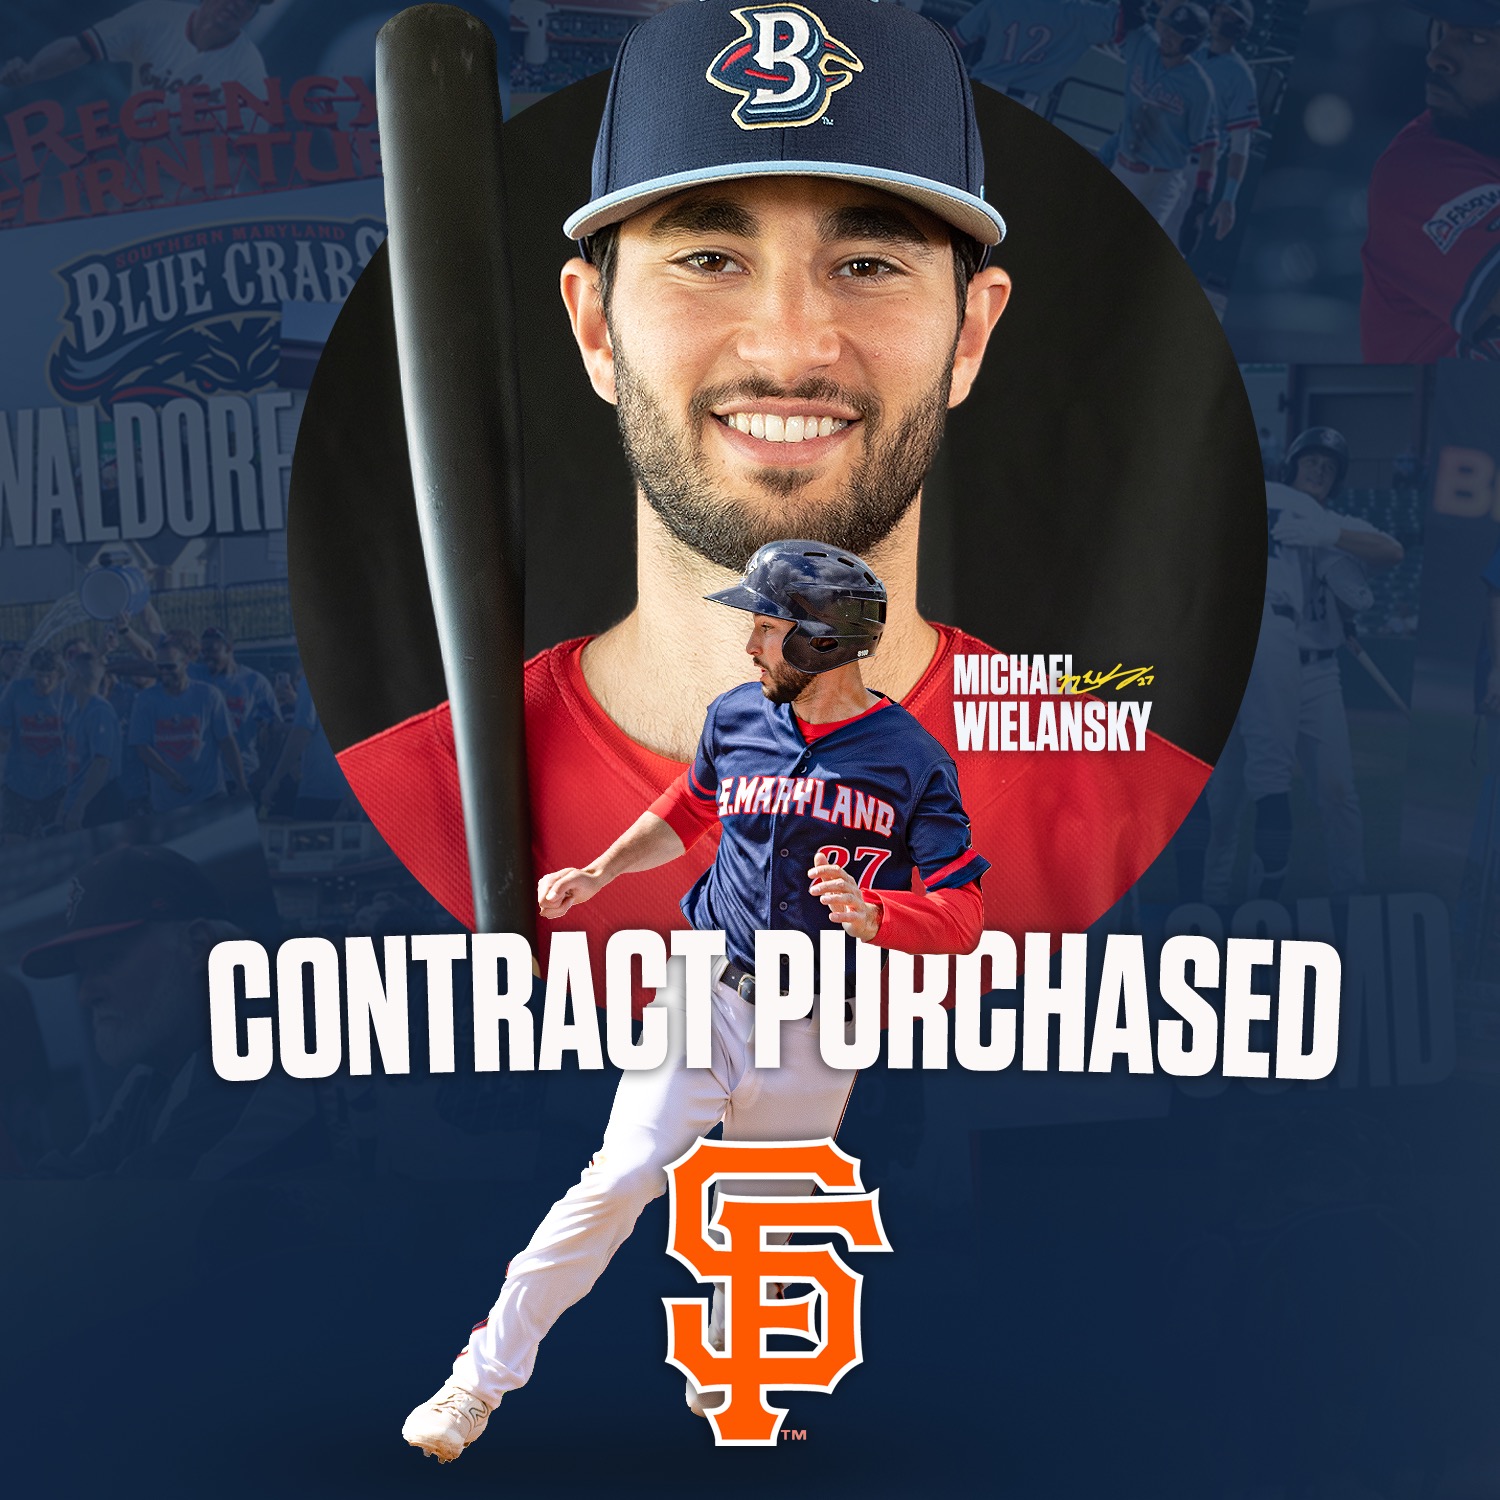 Blue Crabs Middle Infielder has Contract Purchased